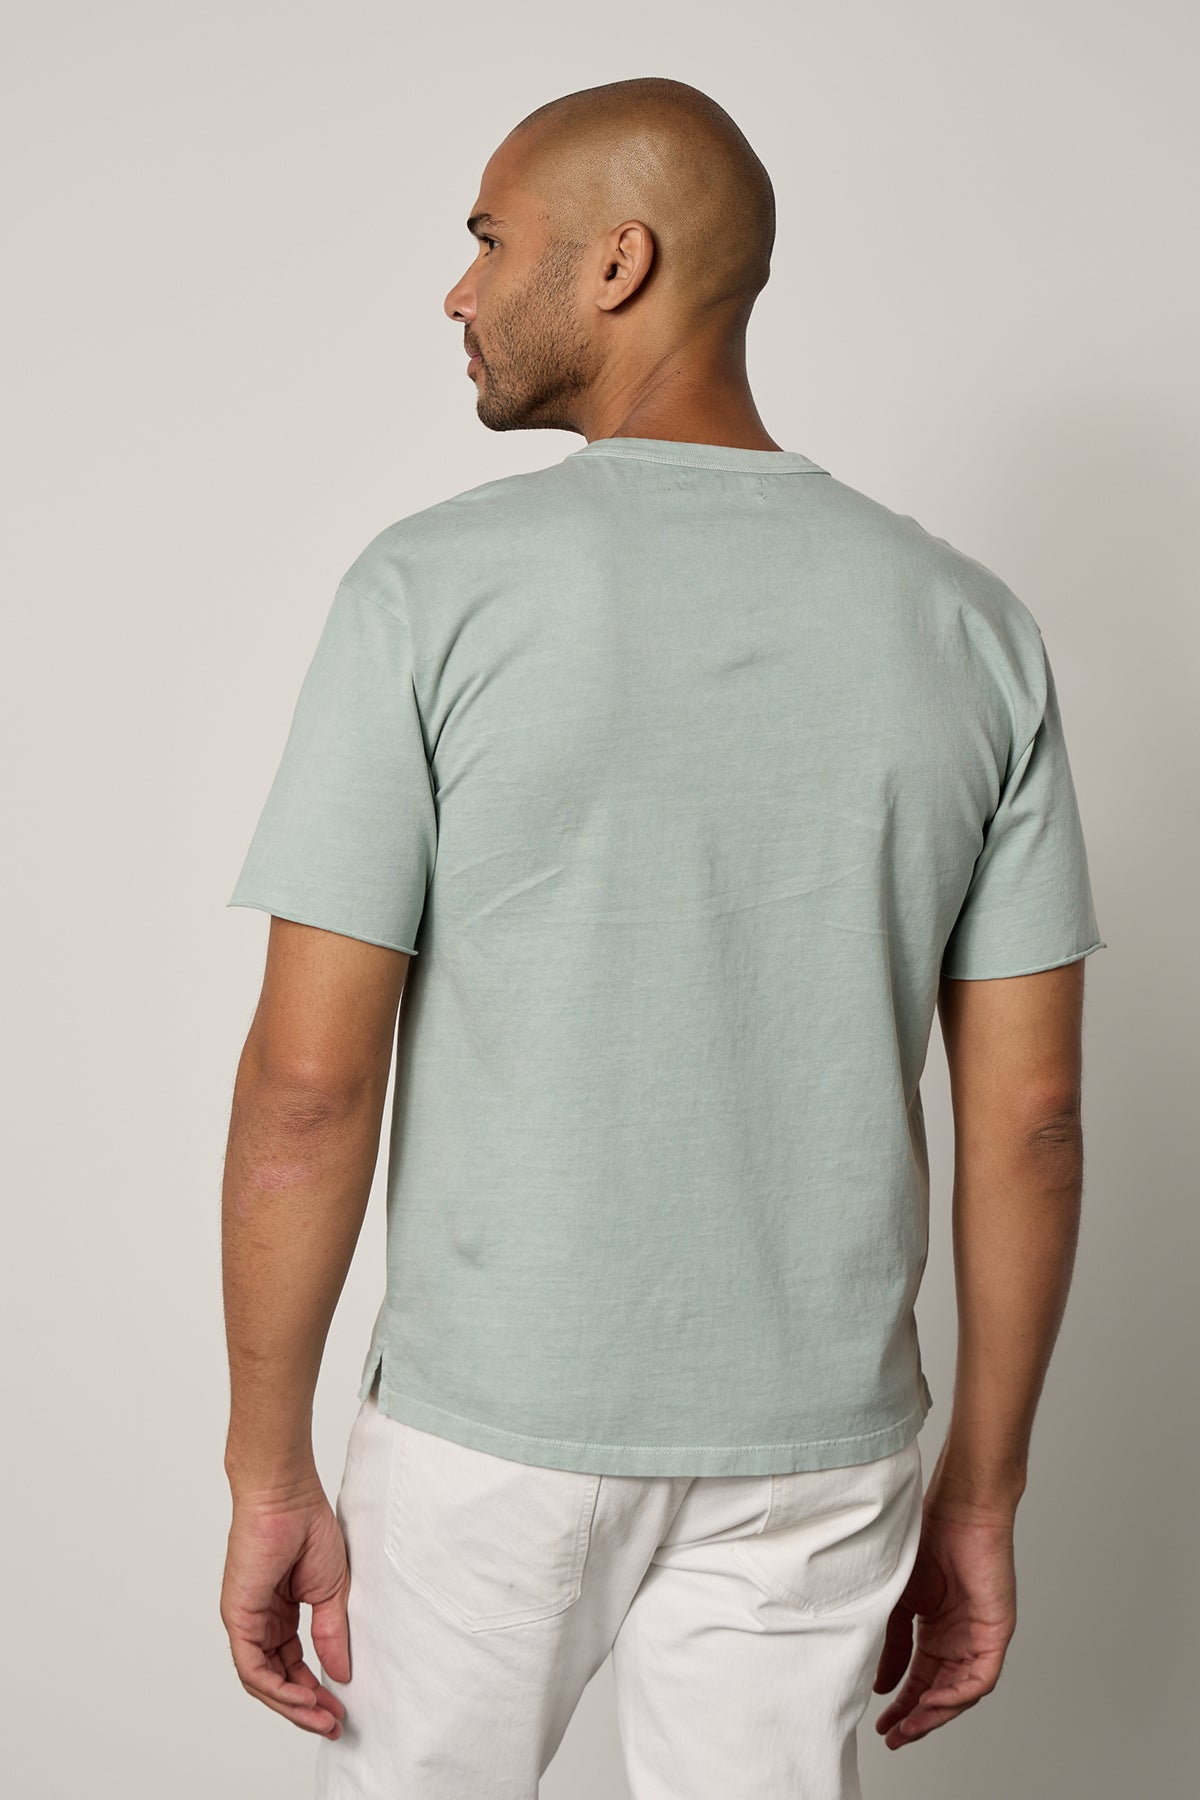   Beau Tee in mint green with white denim back 